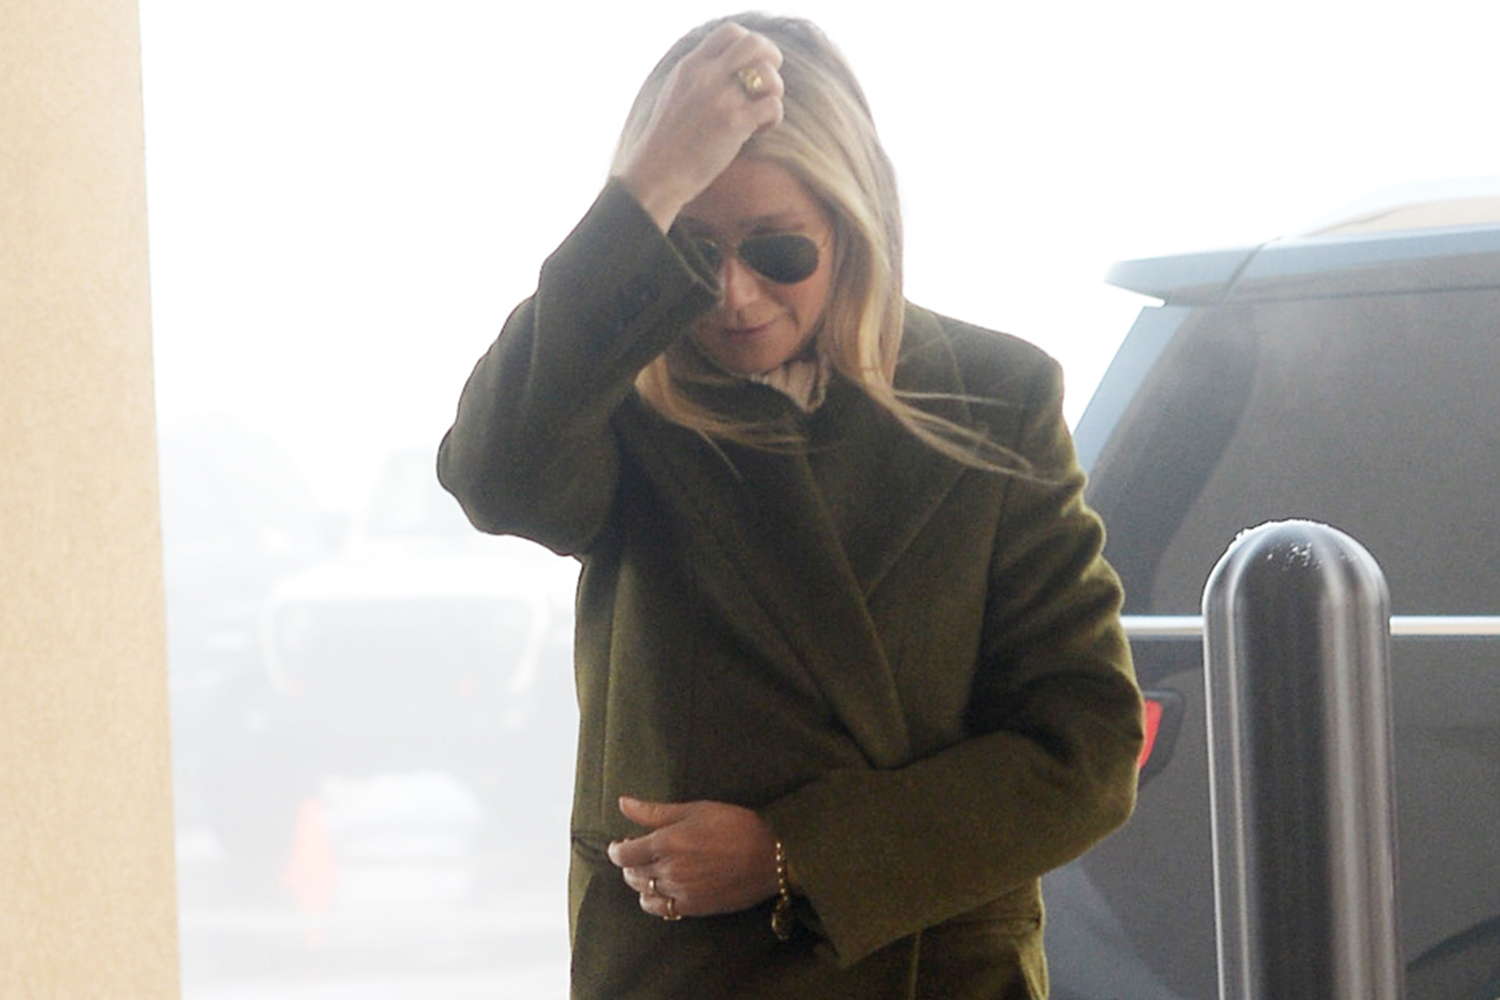 Gwyneth Paltrow arrives to stand trial at the Third District Court in Park City, Utah. A lawsuit filed by a retired optometrist who says the actress-turned-lifestyle influencer violently crashed into him while skiing in Utah in 2016 at one of the most upscale ski resorts in the U.S. Paltrow denies she is responsible and has filed a counterclaim.